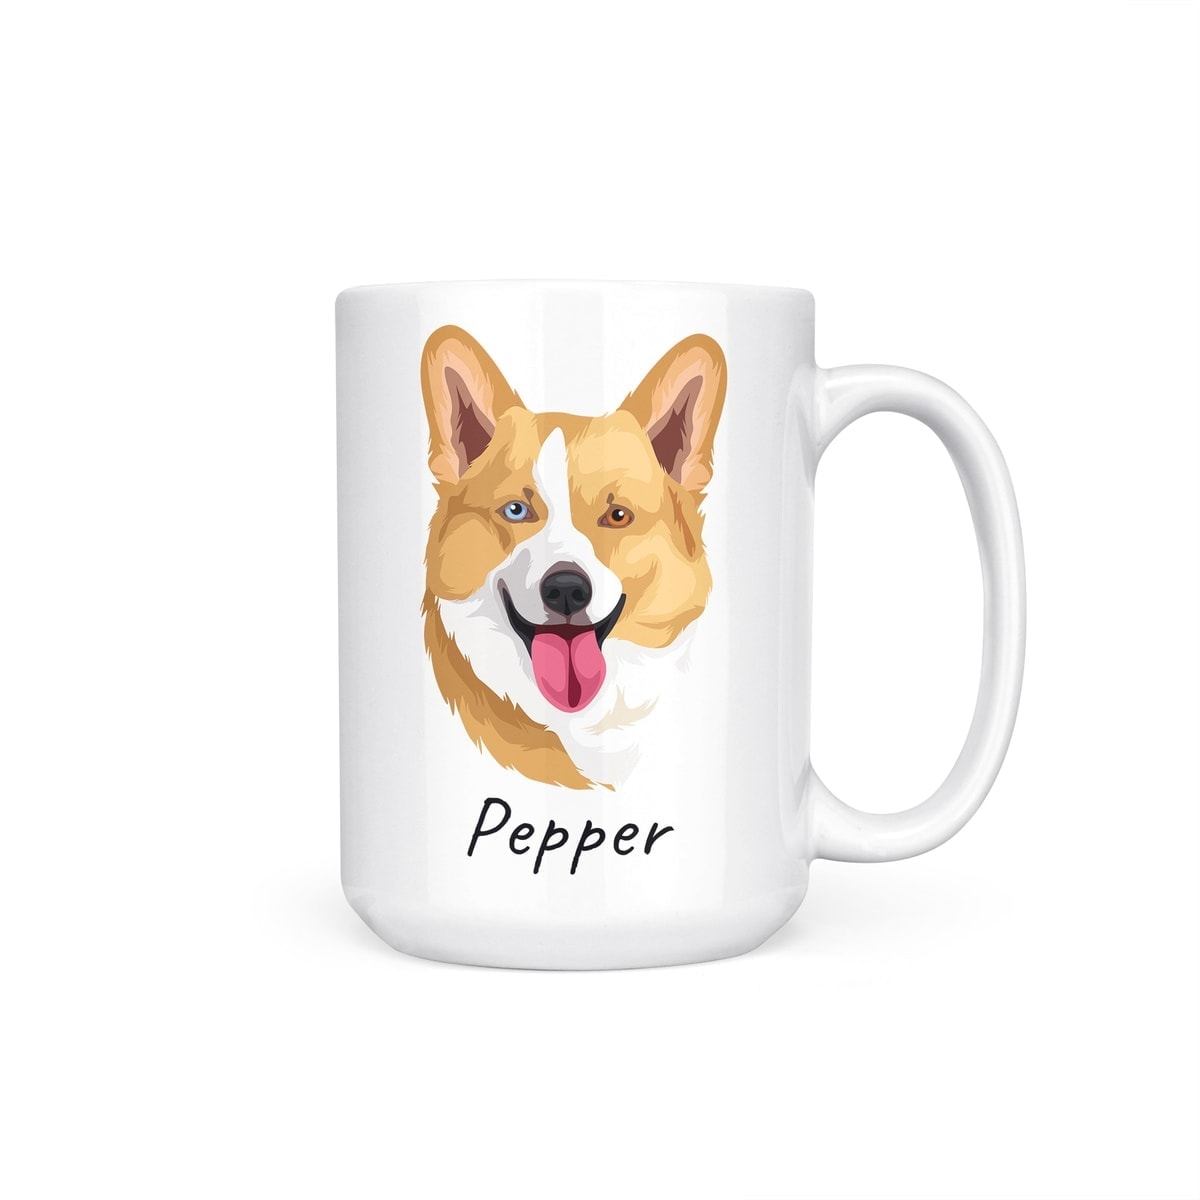 Pet Portrait Mug, The 50 Best and Enticing Gifts for Grandparents in 2022